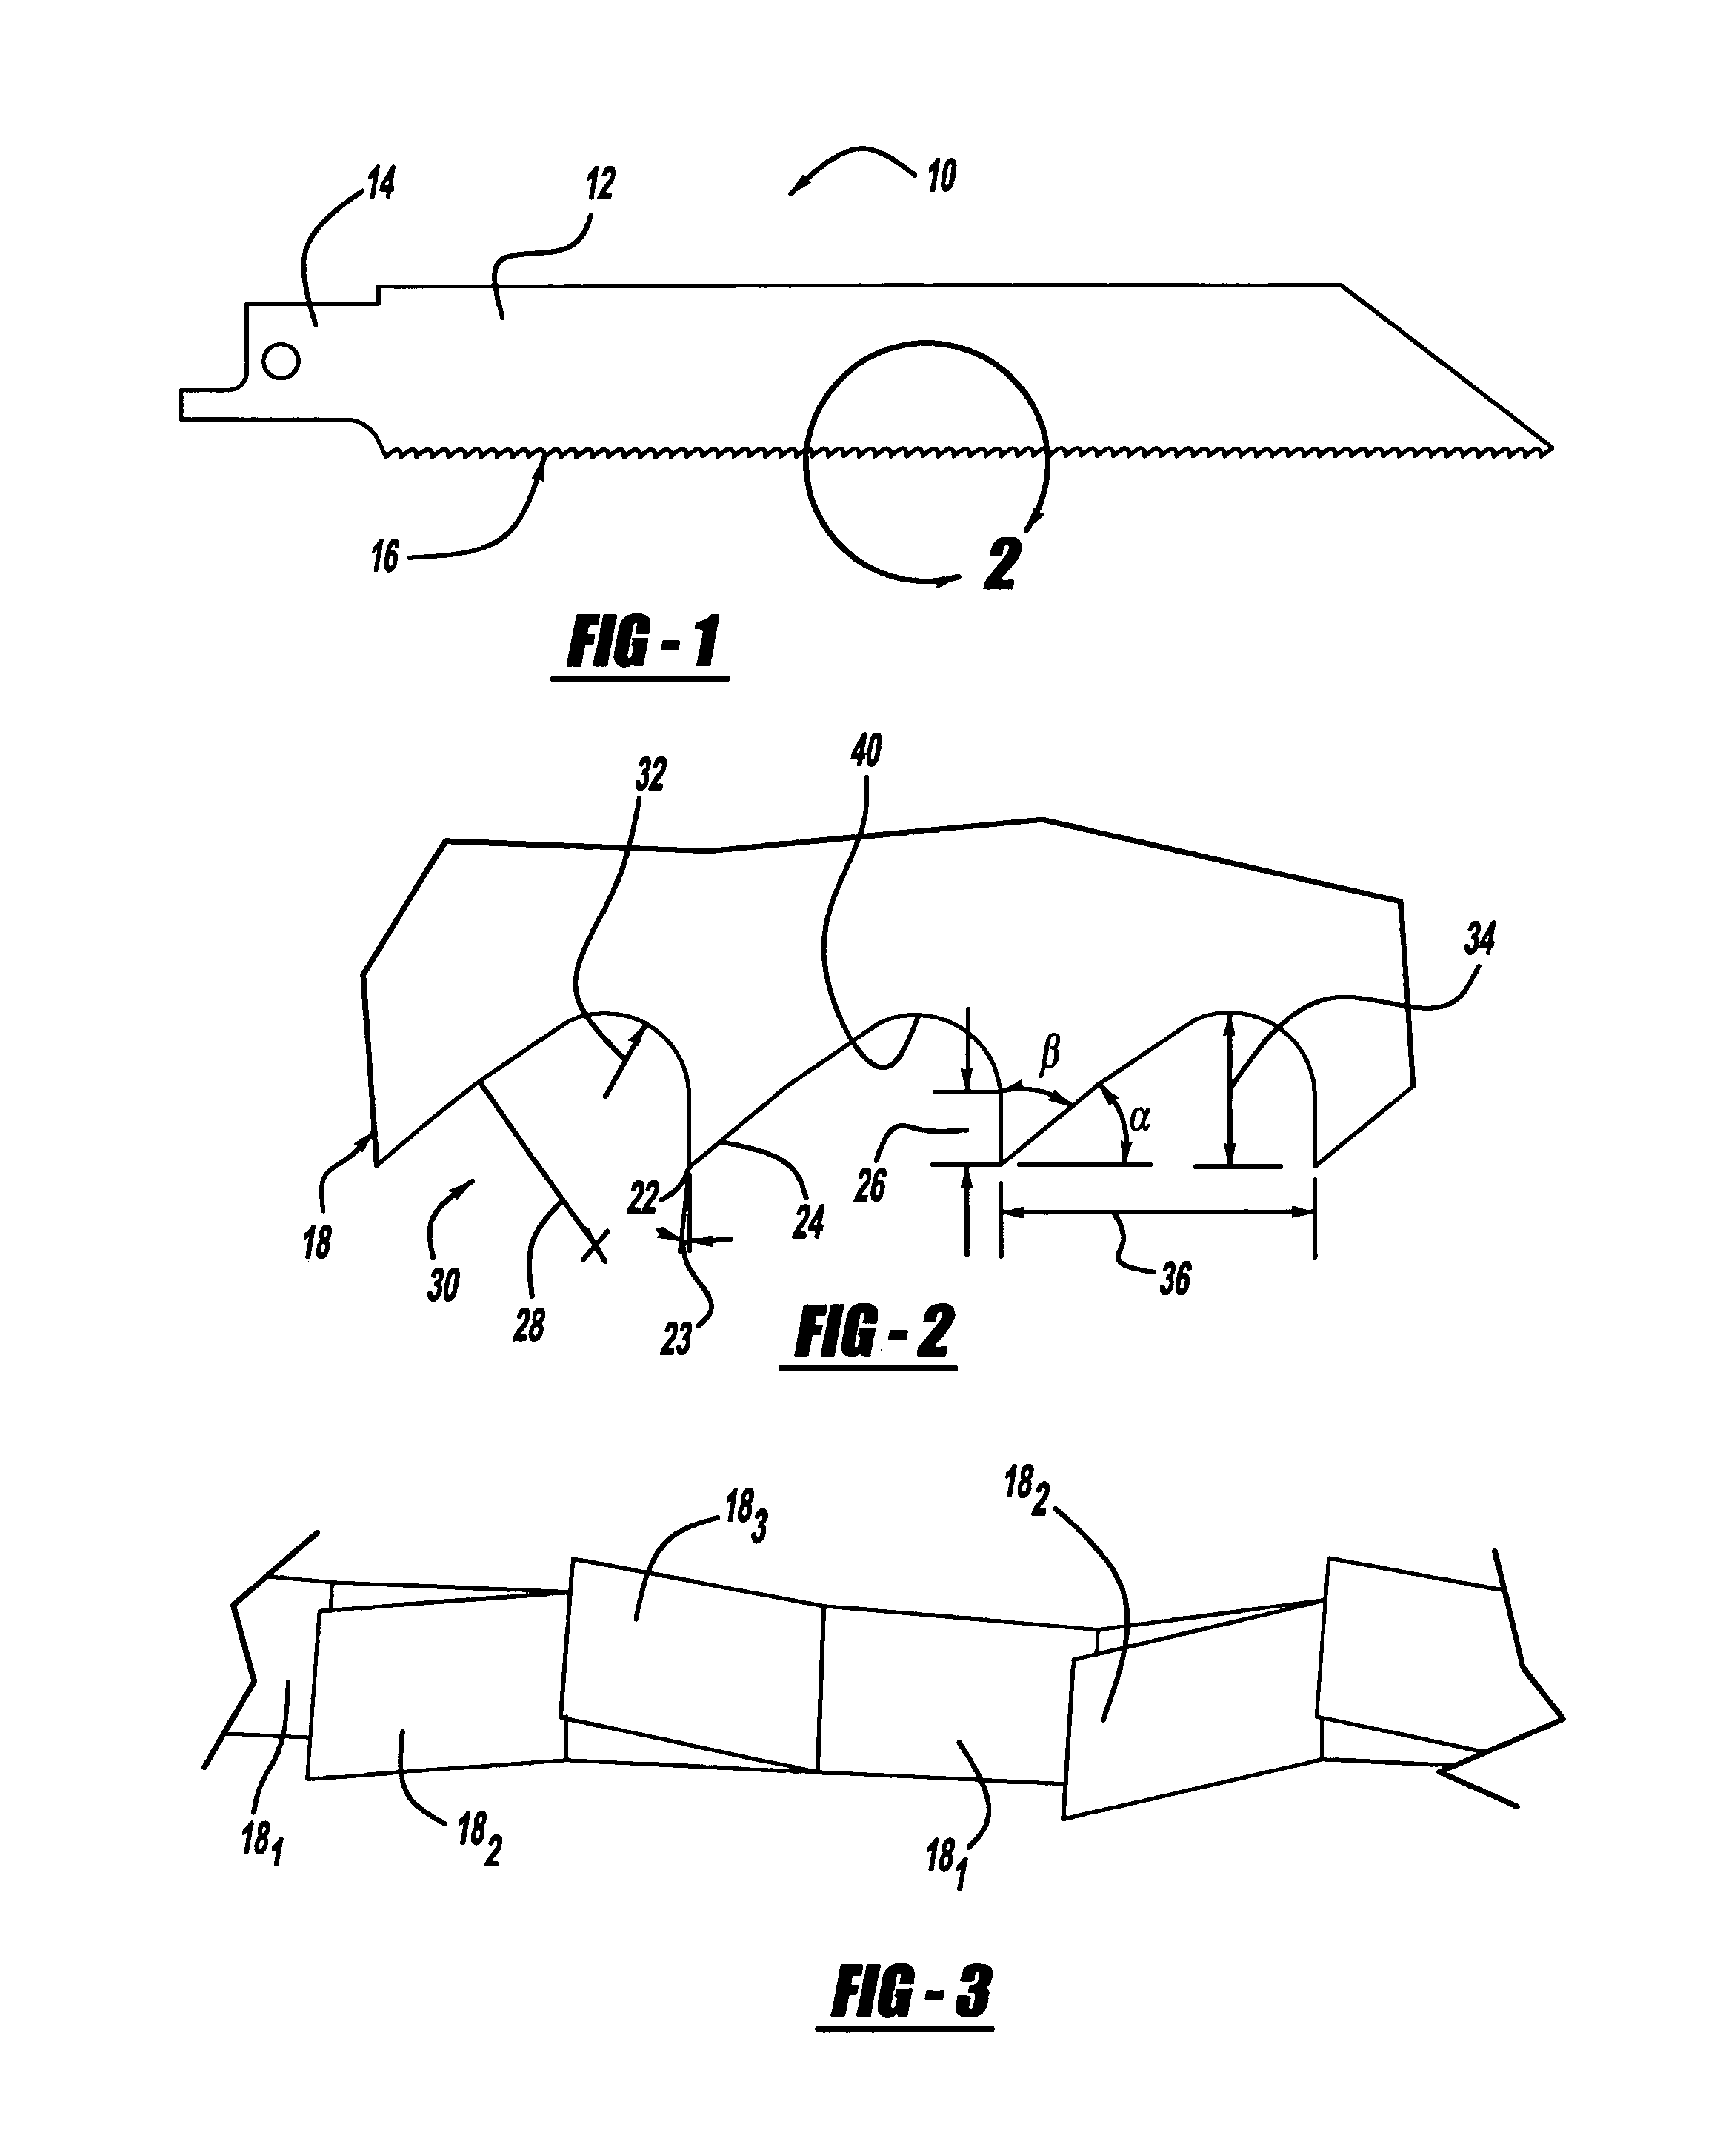 Tooth form design for reciprocating saw blade